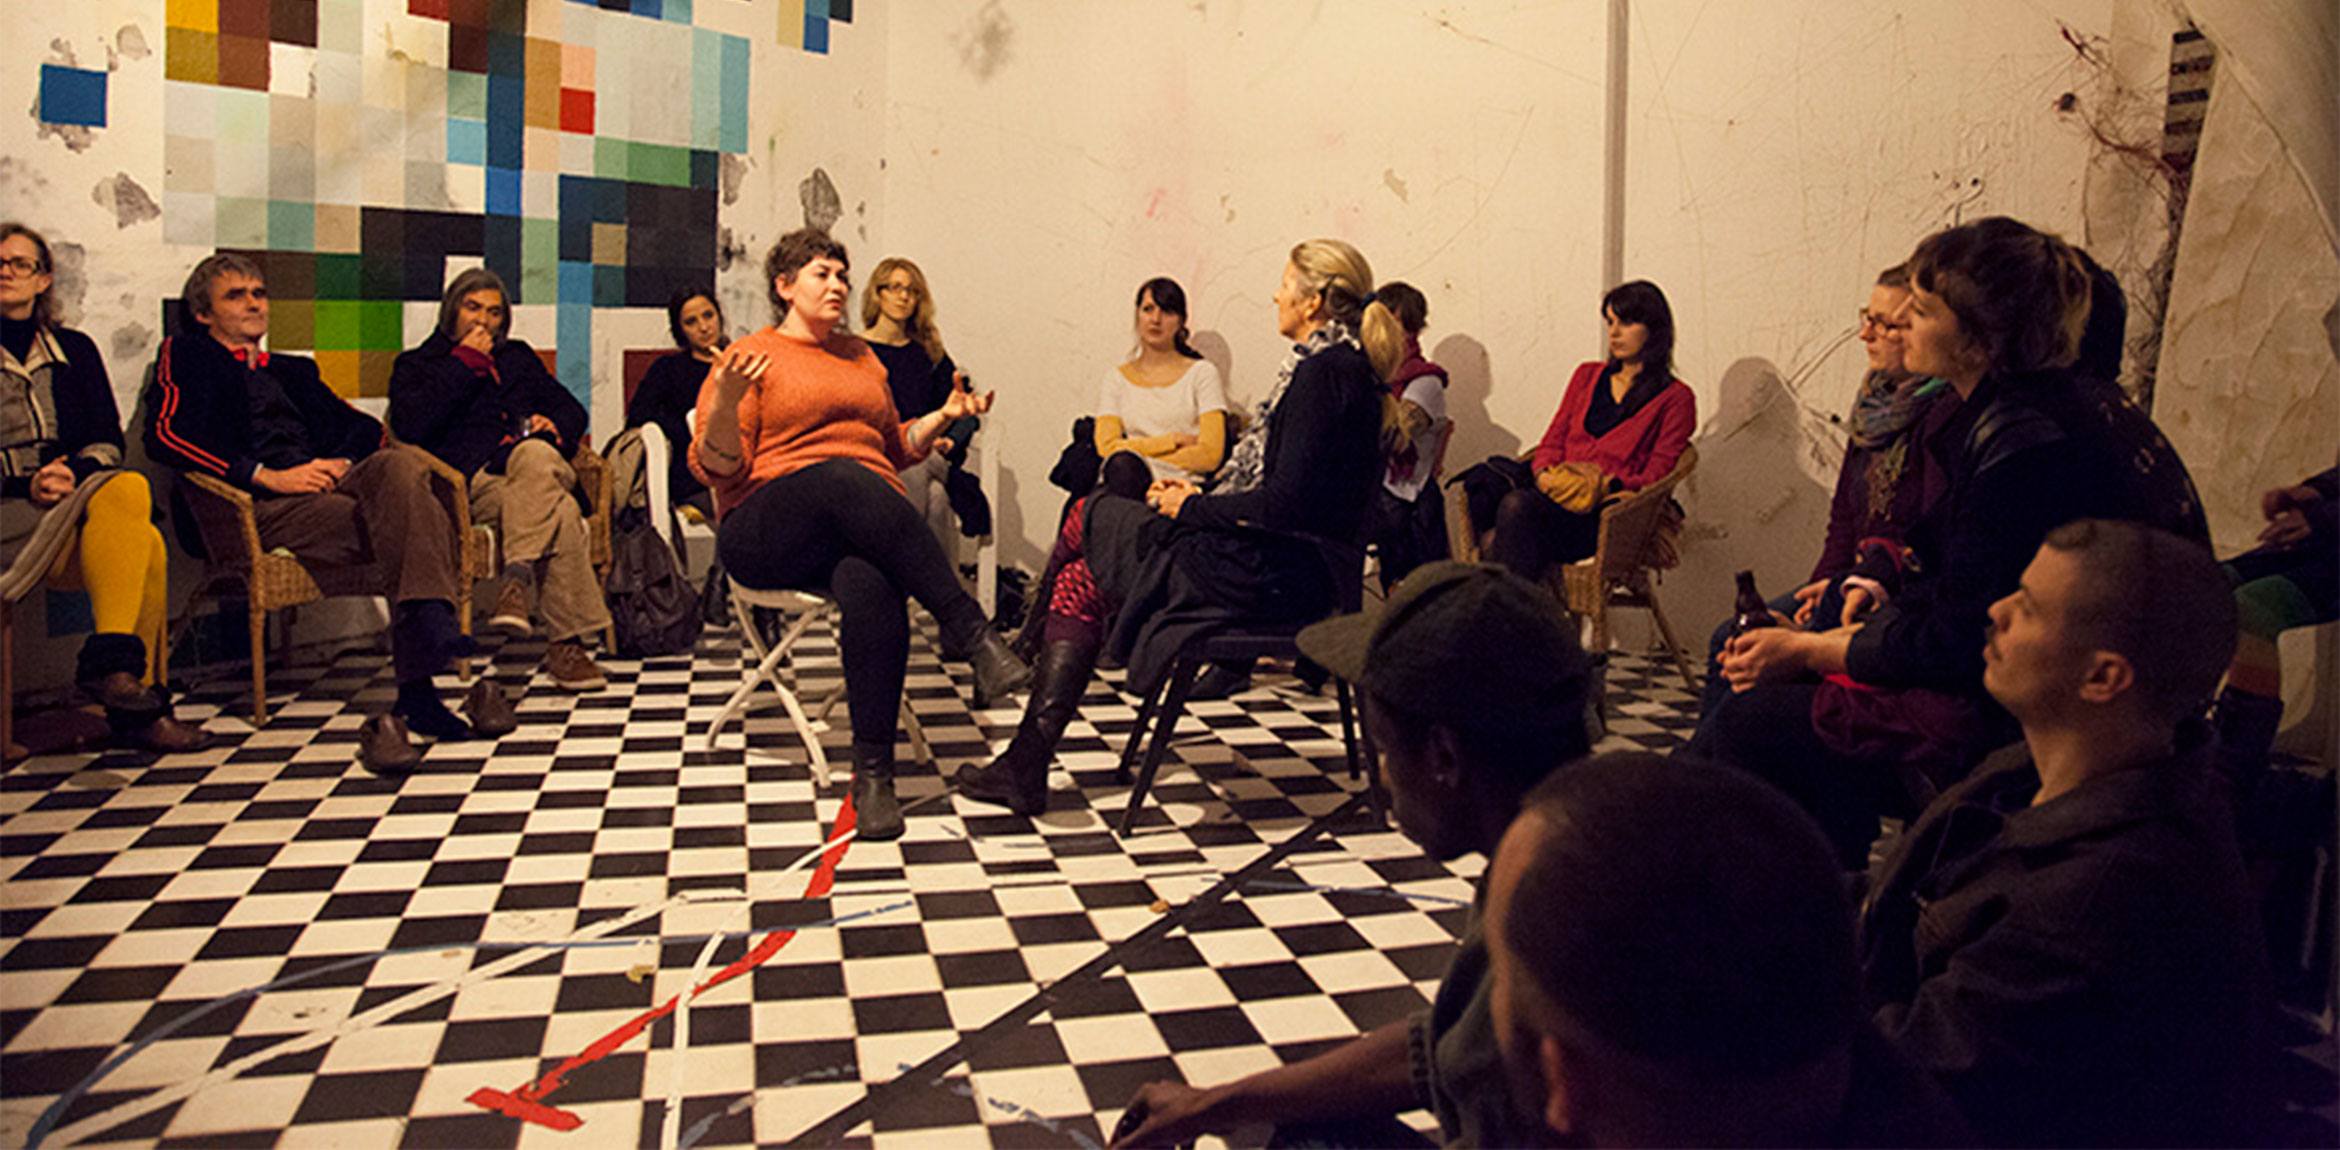 Lindsay Tunkl and Aja Bond sit and converse in the center of a circle of seated guests on a checkboard floor.